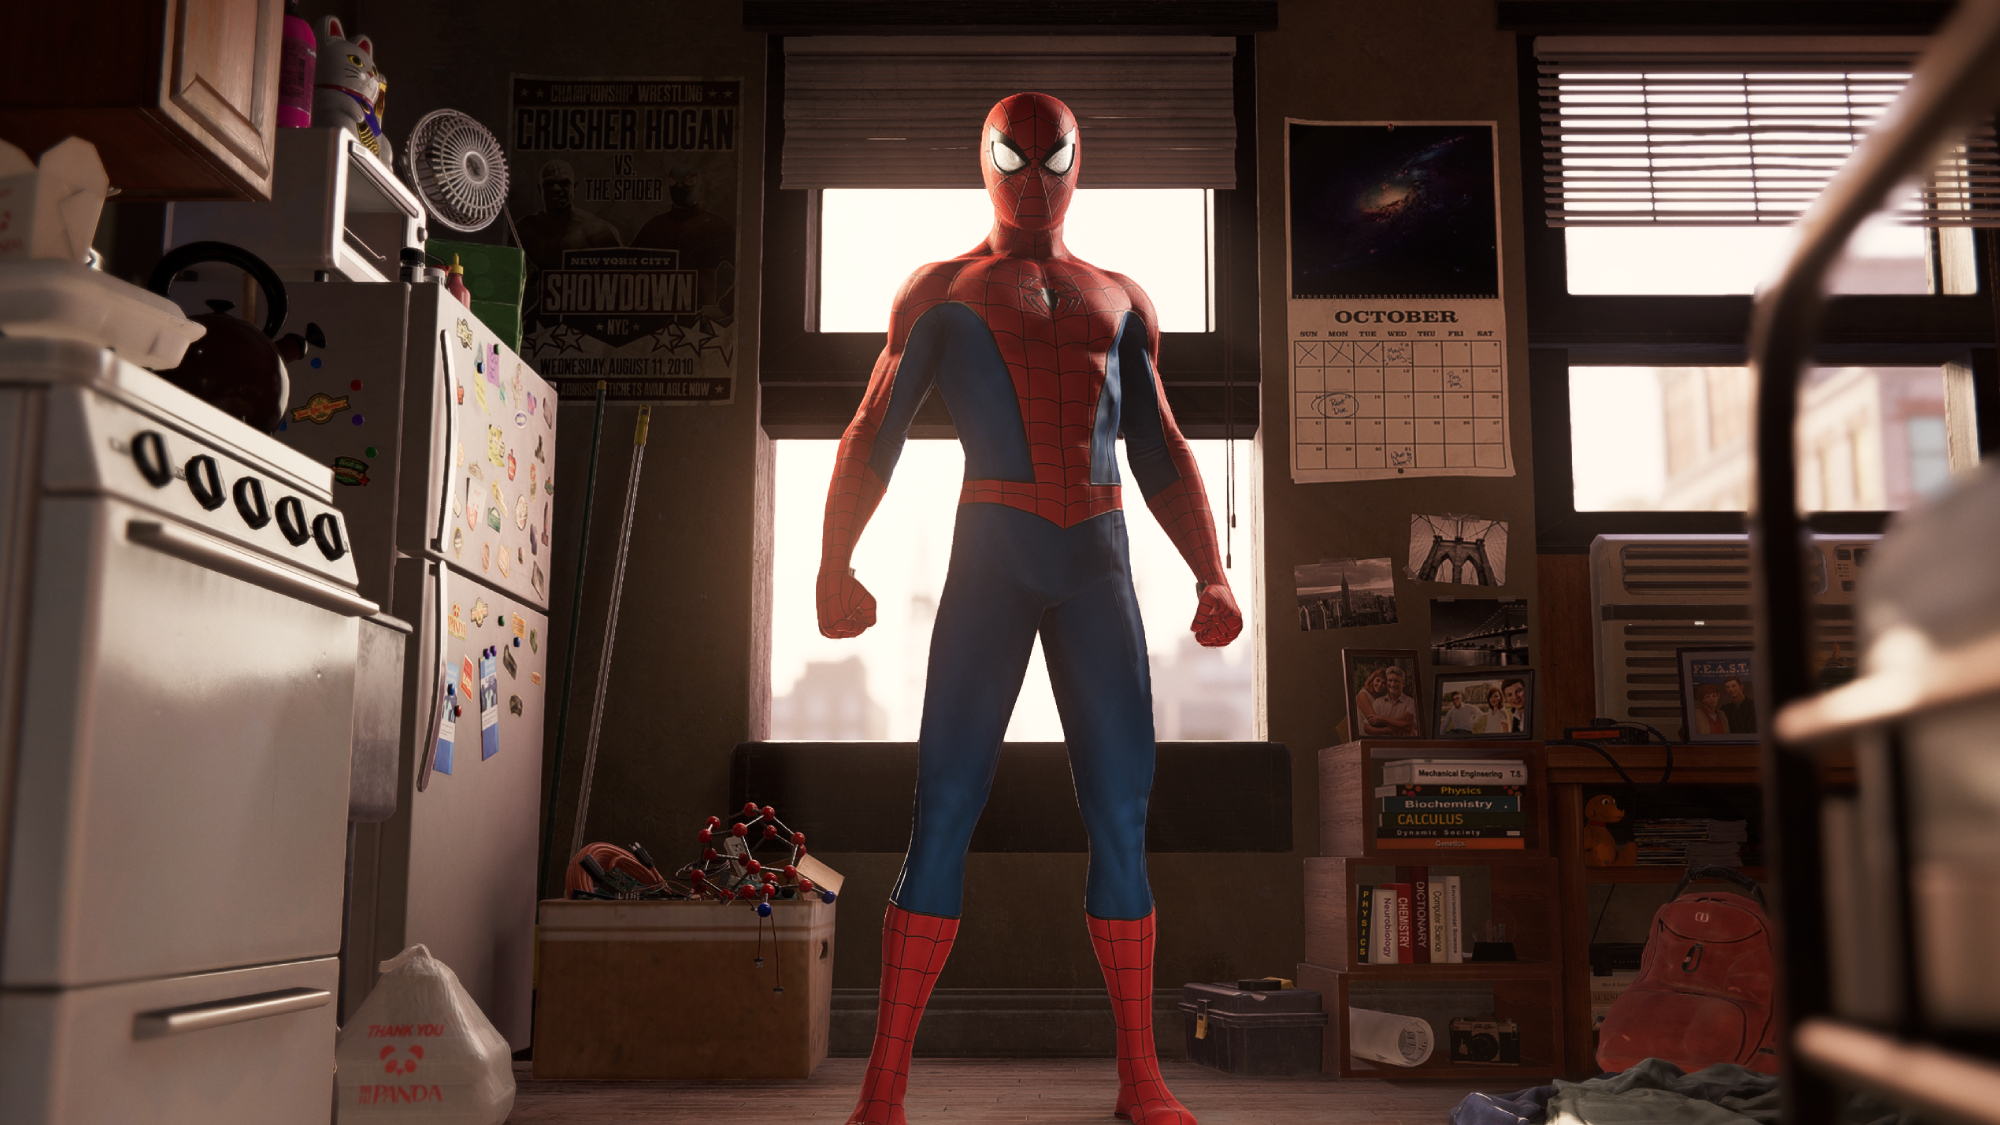 Top 5 Open World Spiderman Games For Low End PC